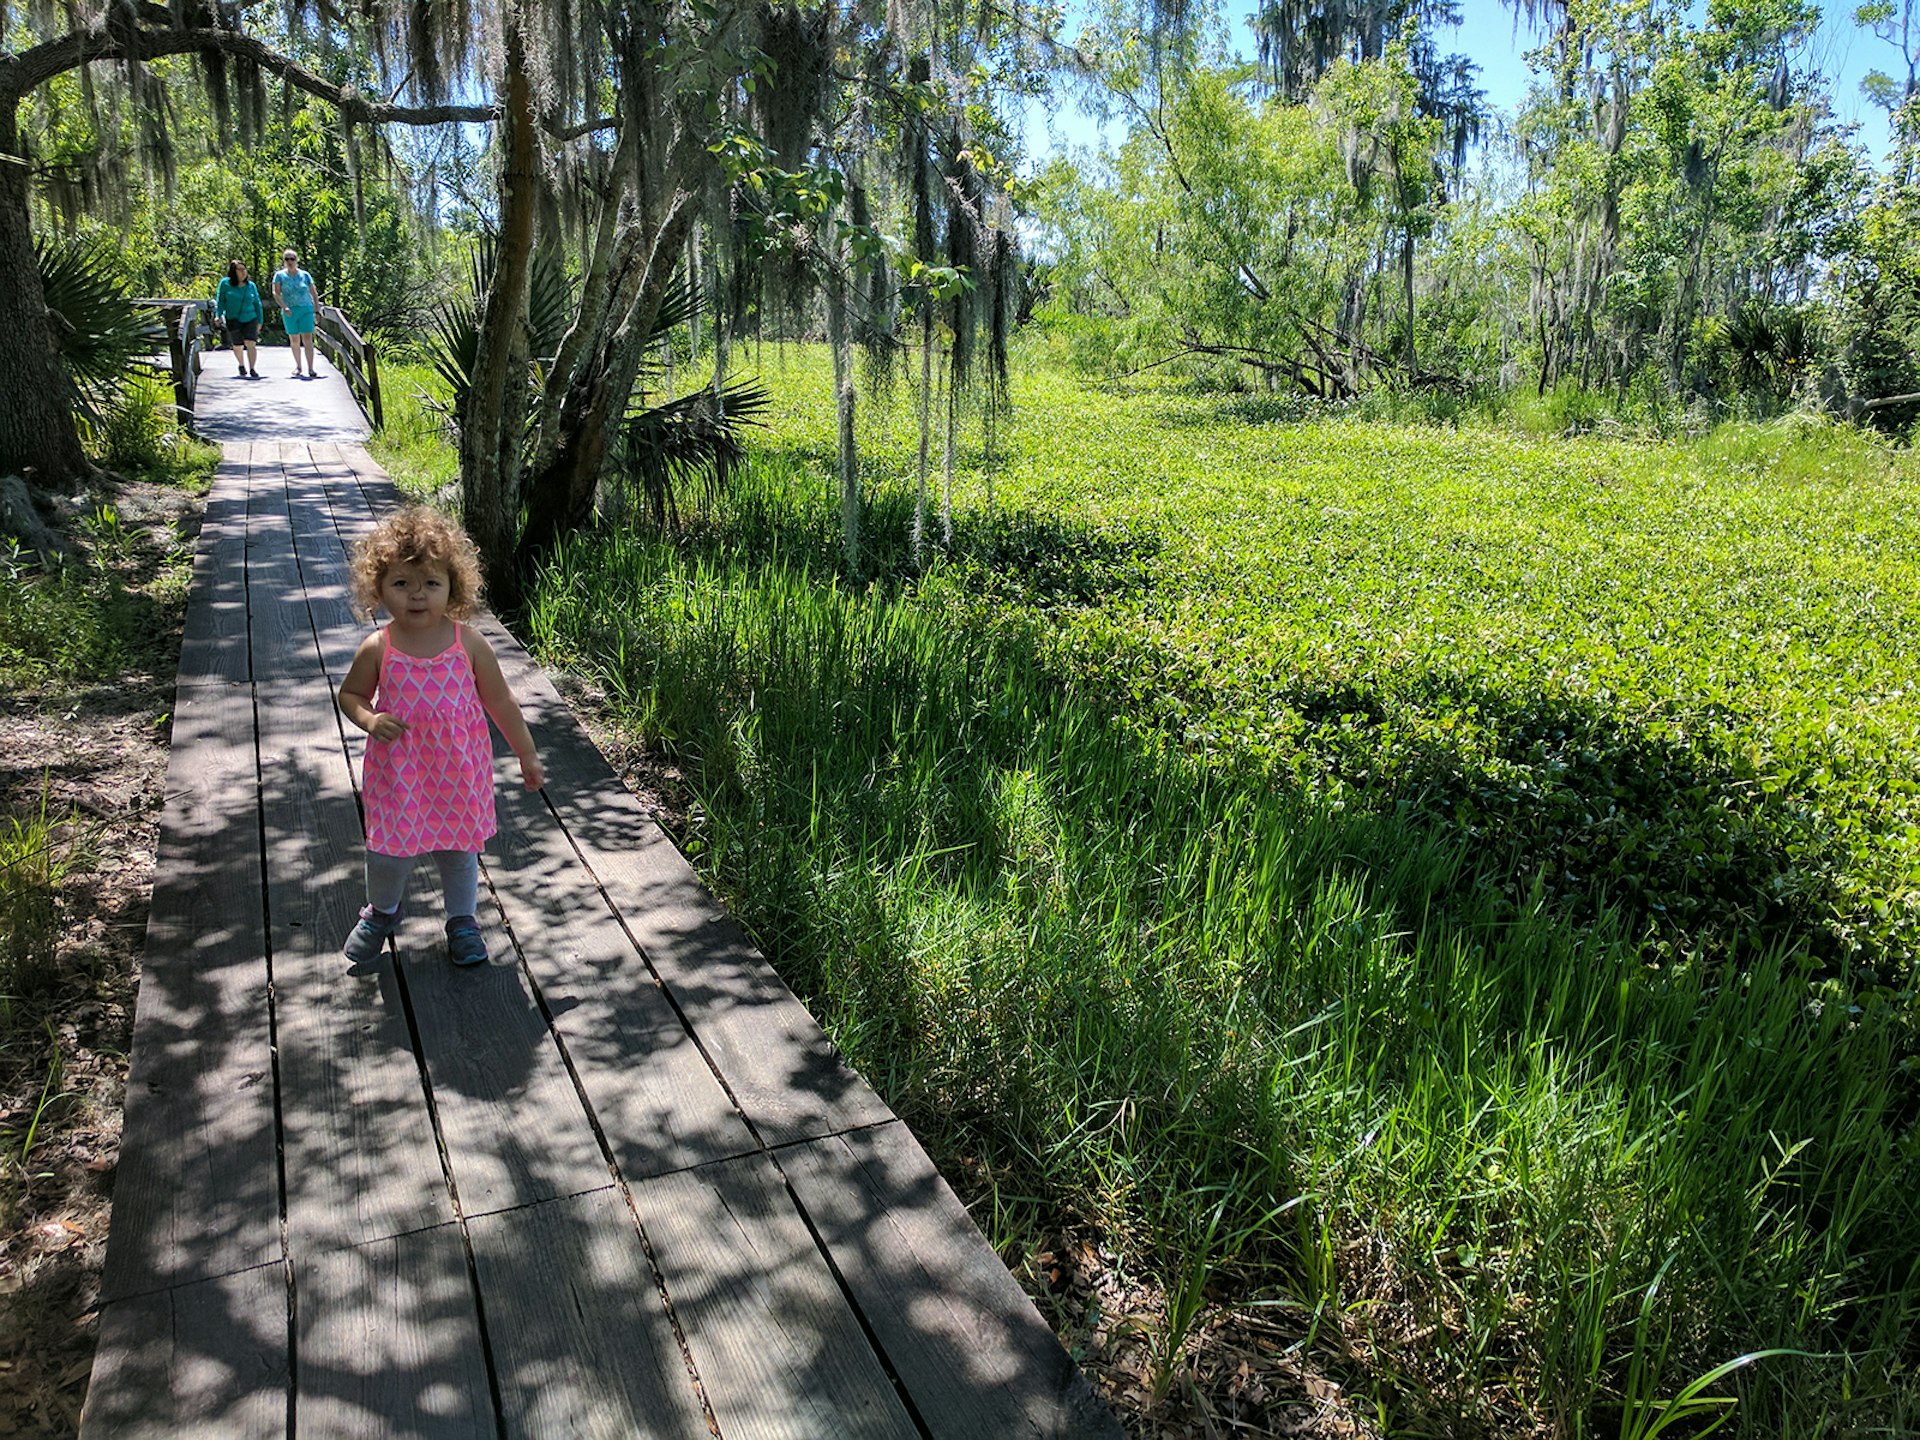 Toddler in a pink dress runs down a shaded boardwalk amid the greenery and Spanish moss-draped trees at Barataria Preserve © Adam Karlin / Lonely Planet